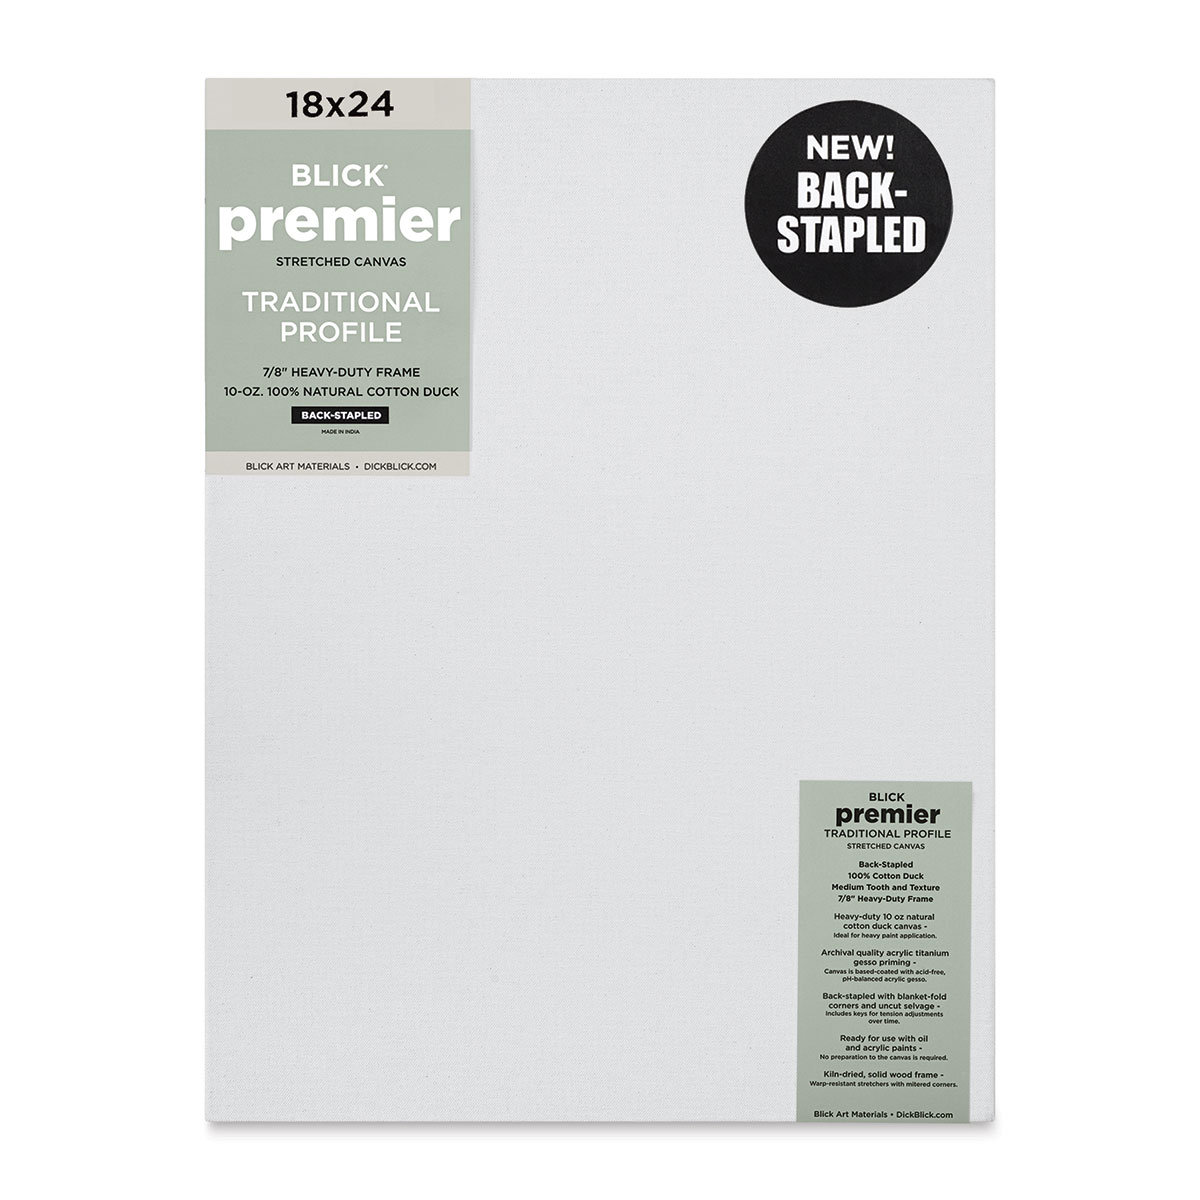 Blick Premier Stretched Cotton Canvas - Traditional Profile, Back-Stapled, 18 x 24